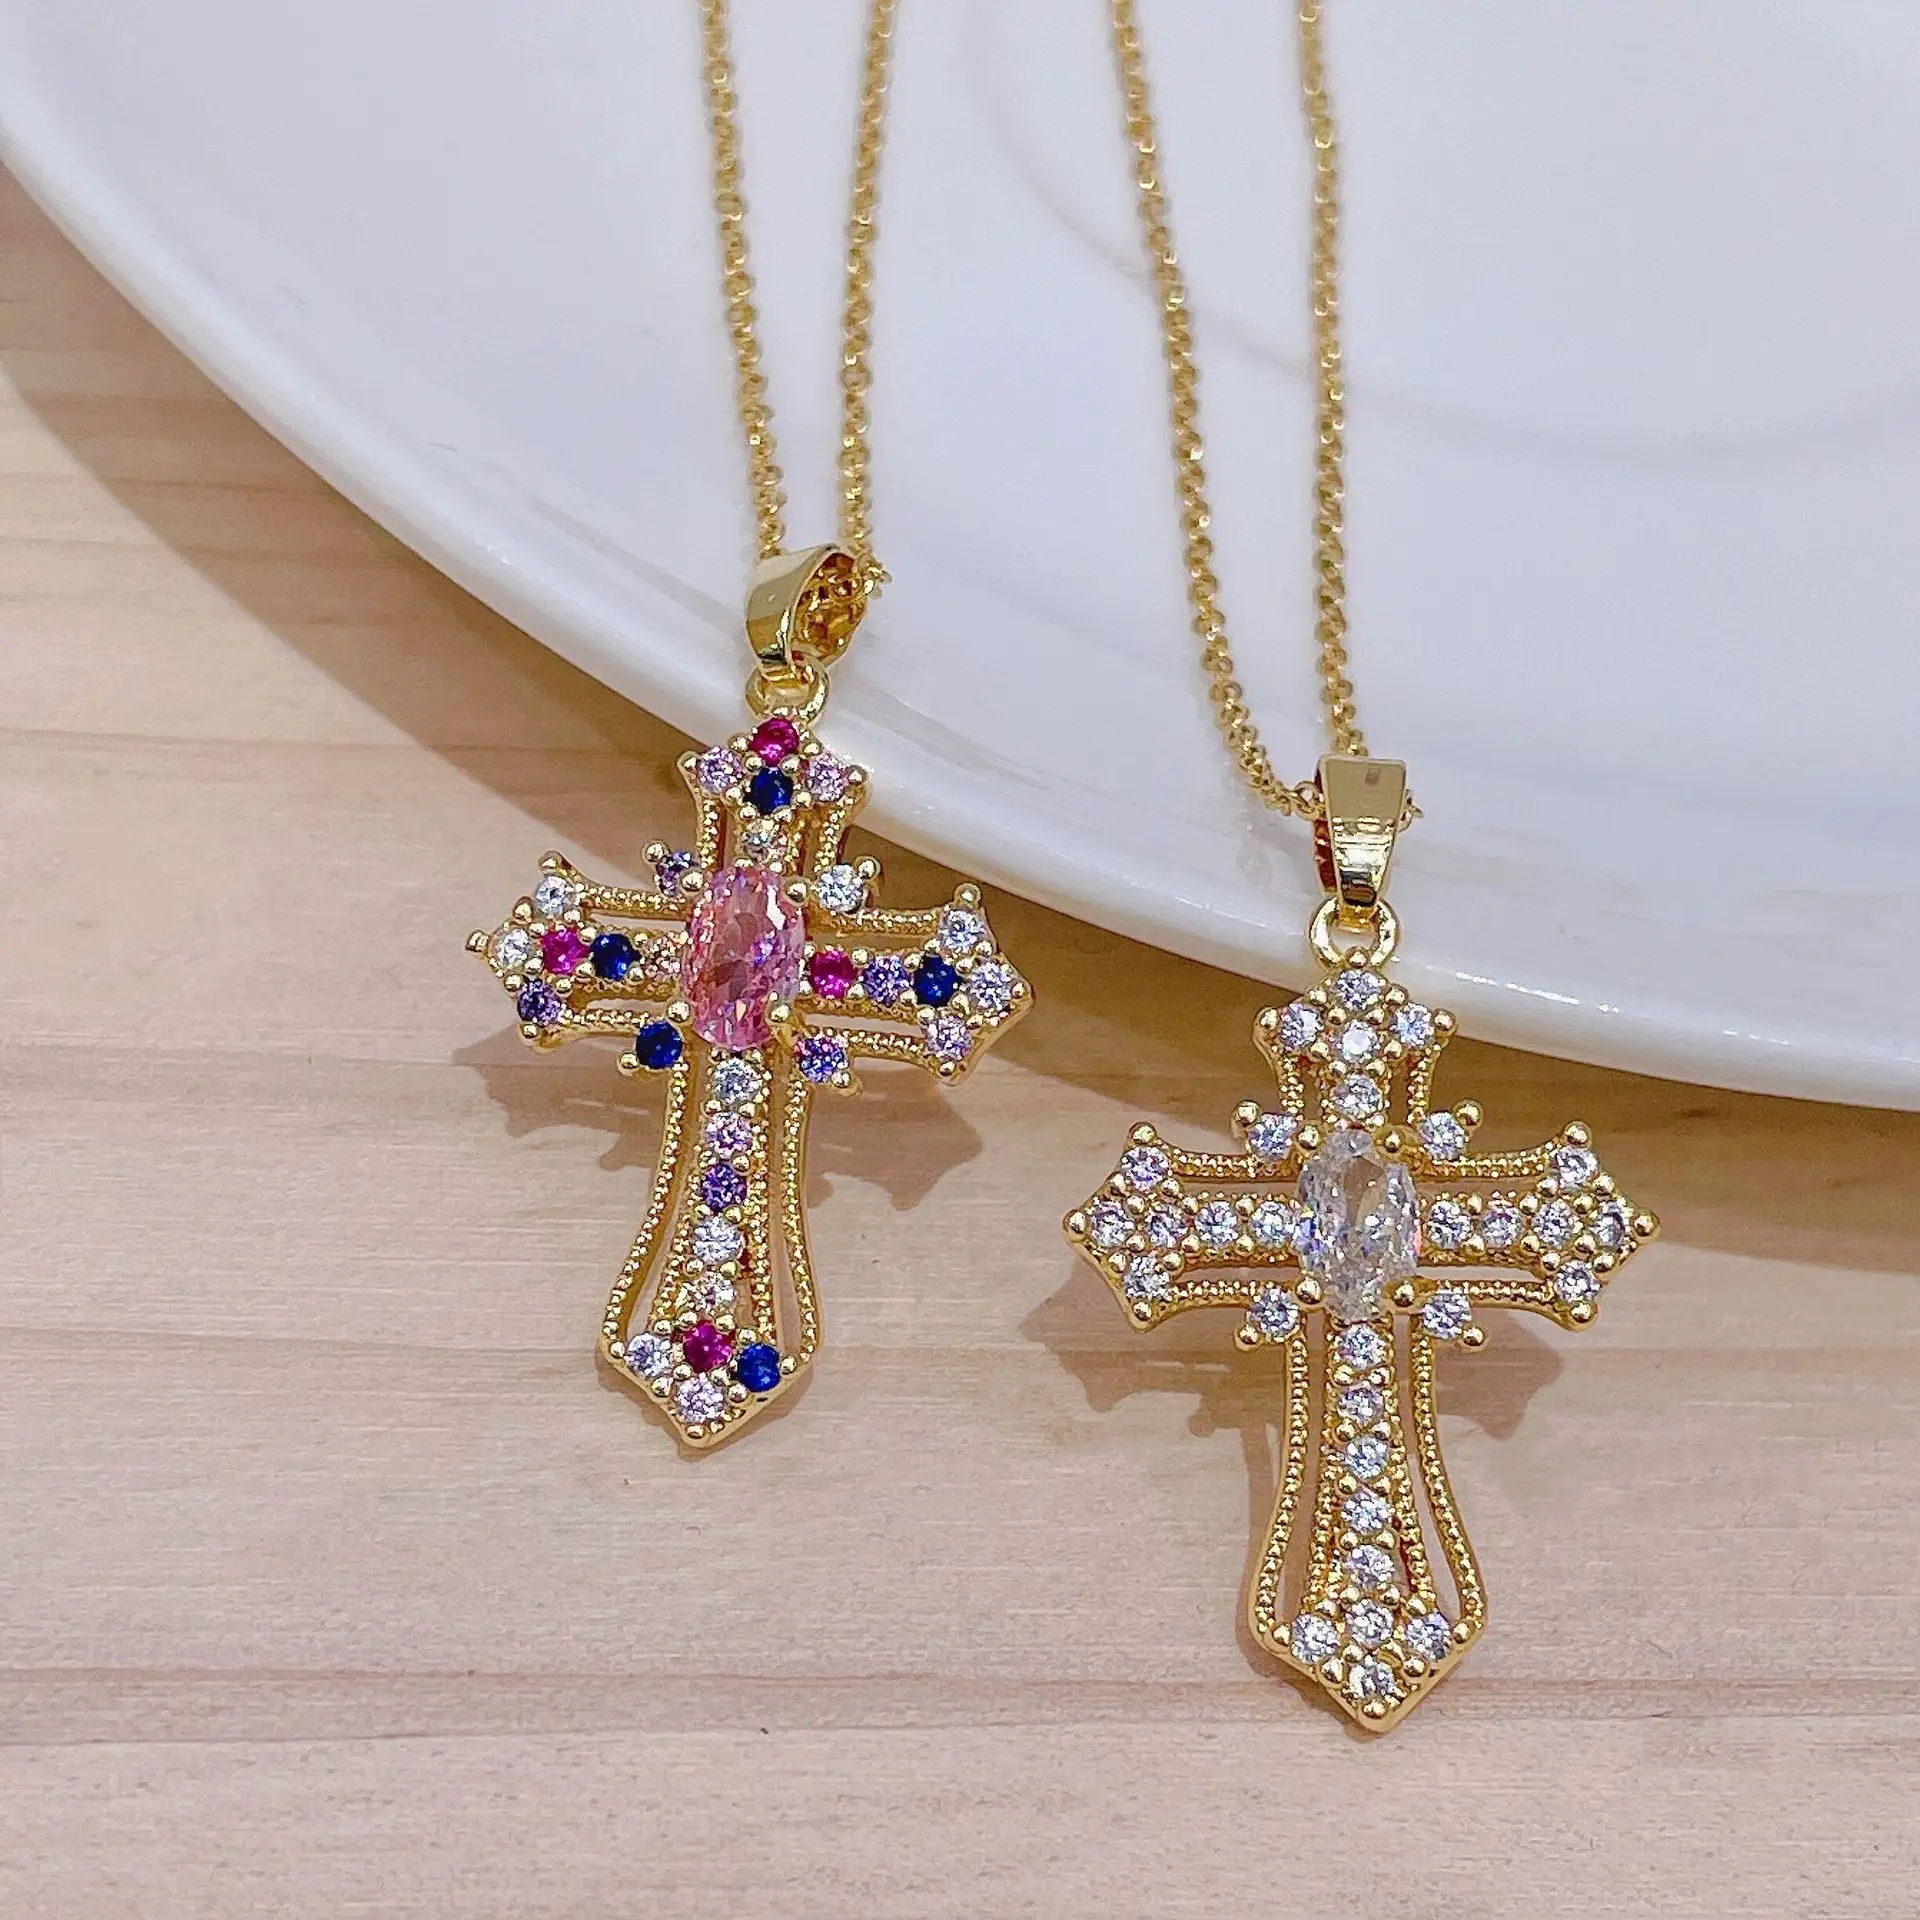 Aesthetic Vintage Punk Colorful Shiny Cross Necklace Personality Pendant for Women Men Luxury Charm Design Gothic Clavicle Chain